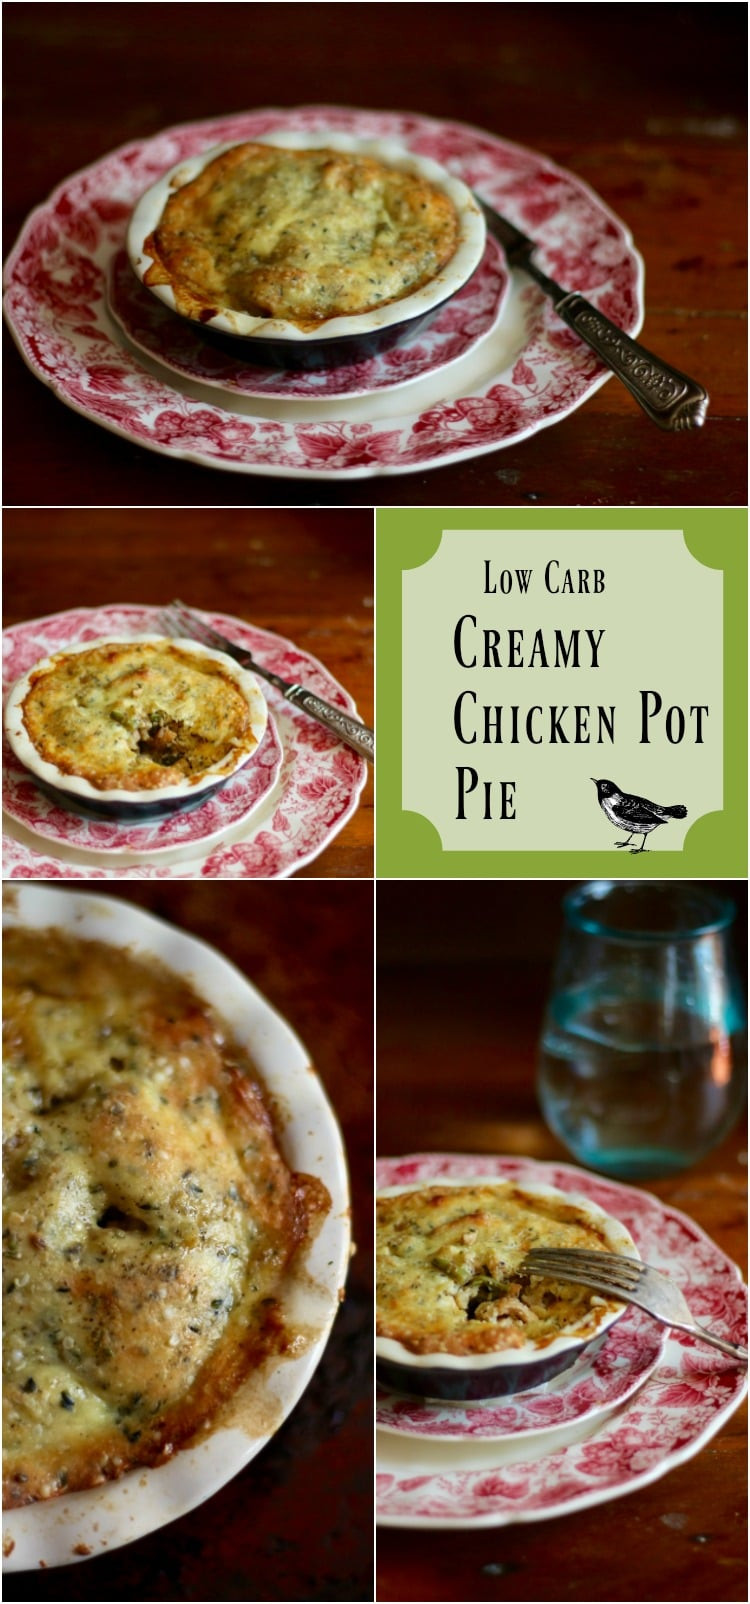 Low Calorie Chicken Pot Pie Recipe
 Creamy Chicken Pot Pie Low Carb and GF lowcarb ology